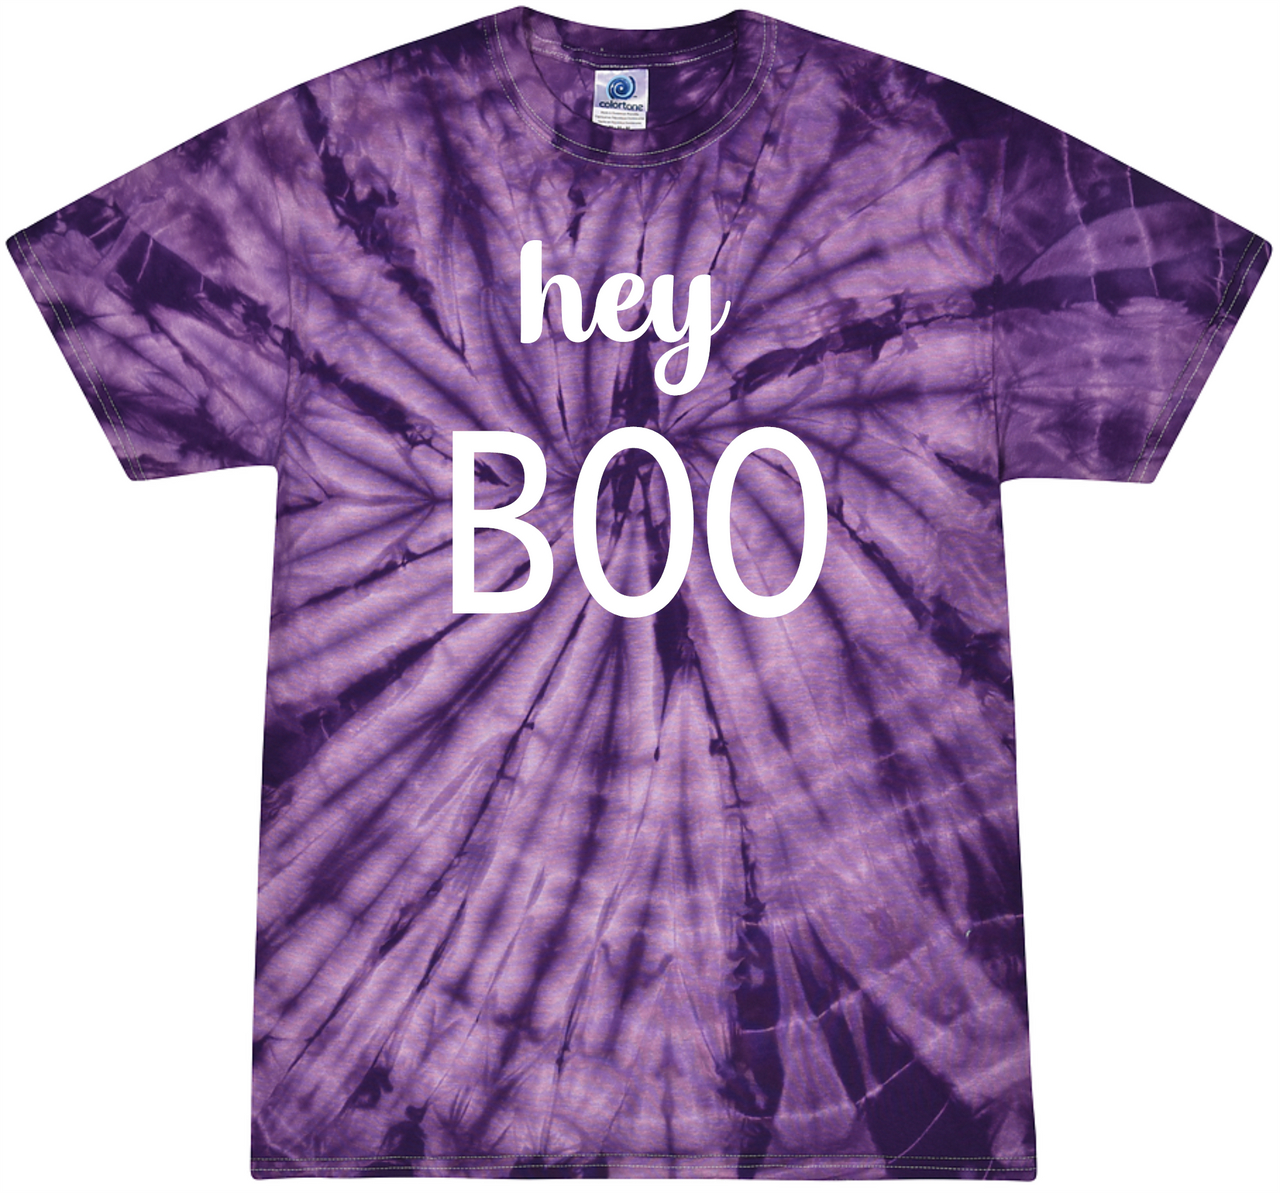 hey BOO Tie-dyed Tee Adult Shirt by Akron Pride Custom Tees | Akron Pride Custom Tees